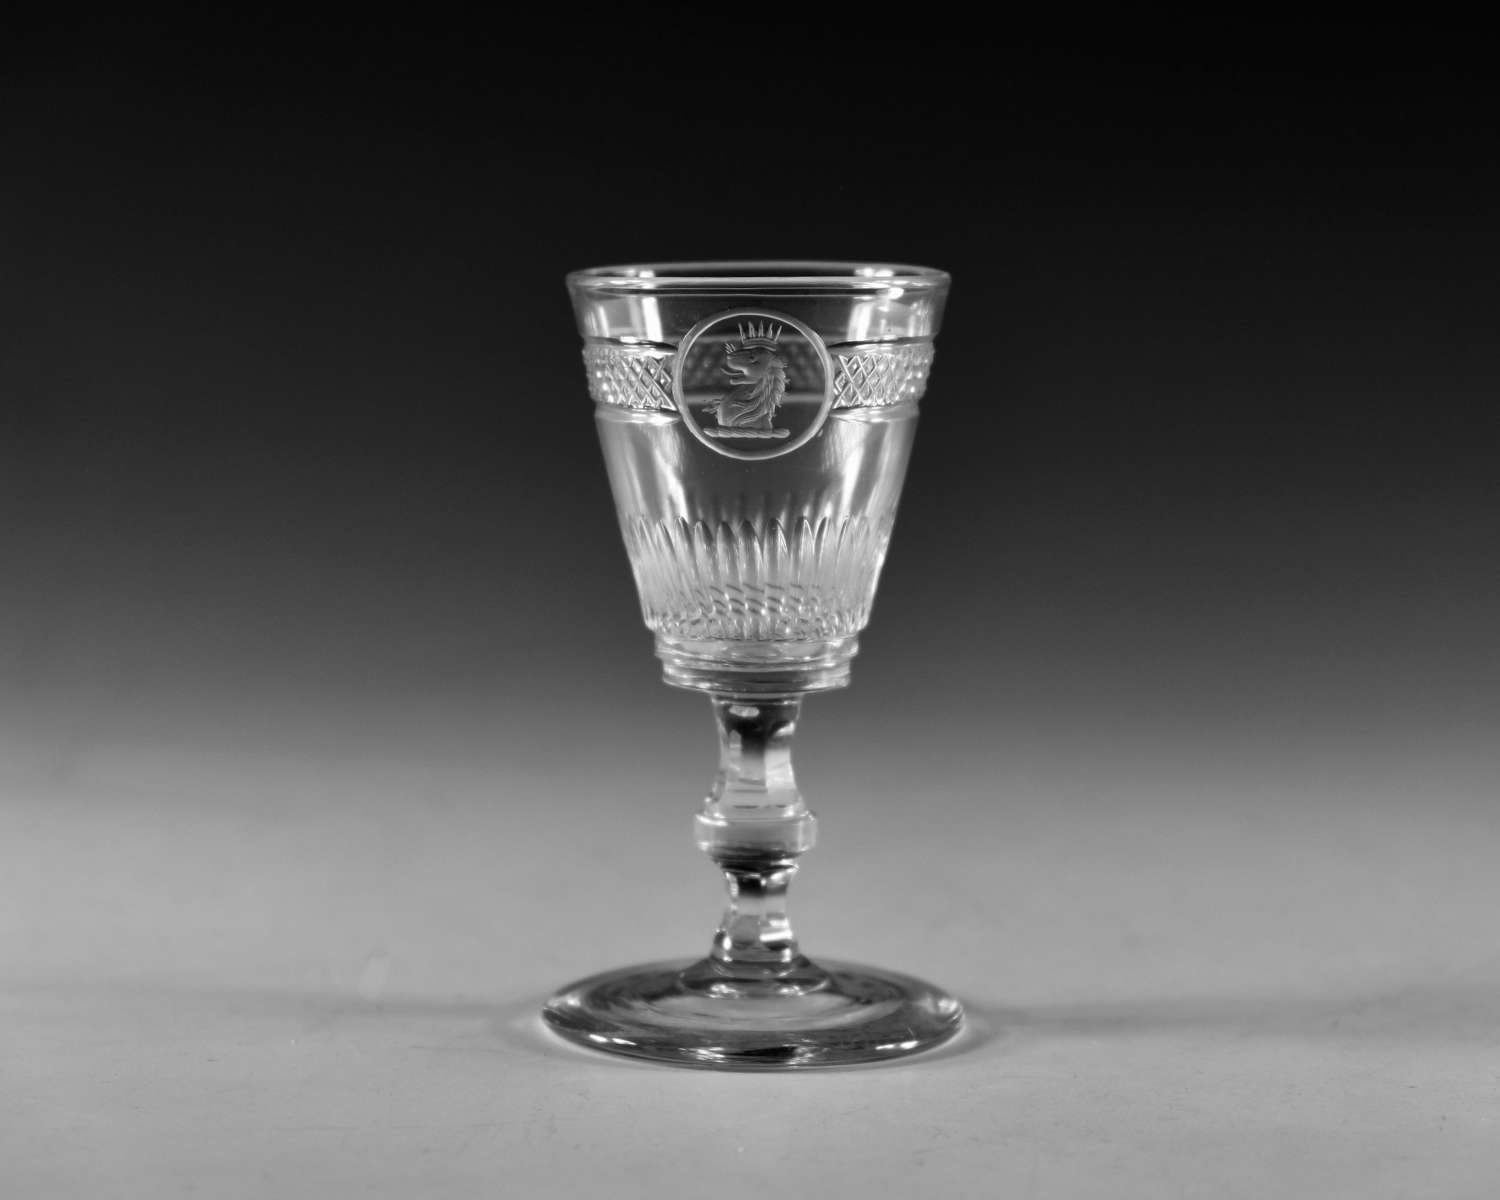 Antique glass - Small Clan MacGregor crested glasses c1820